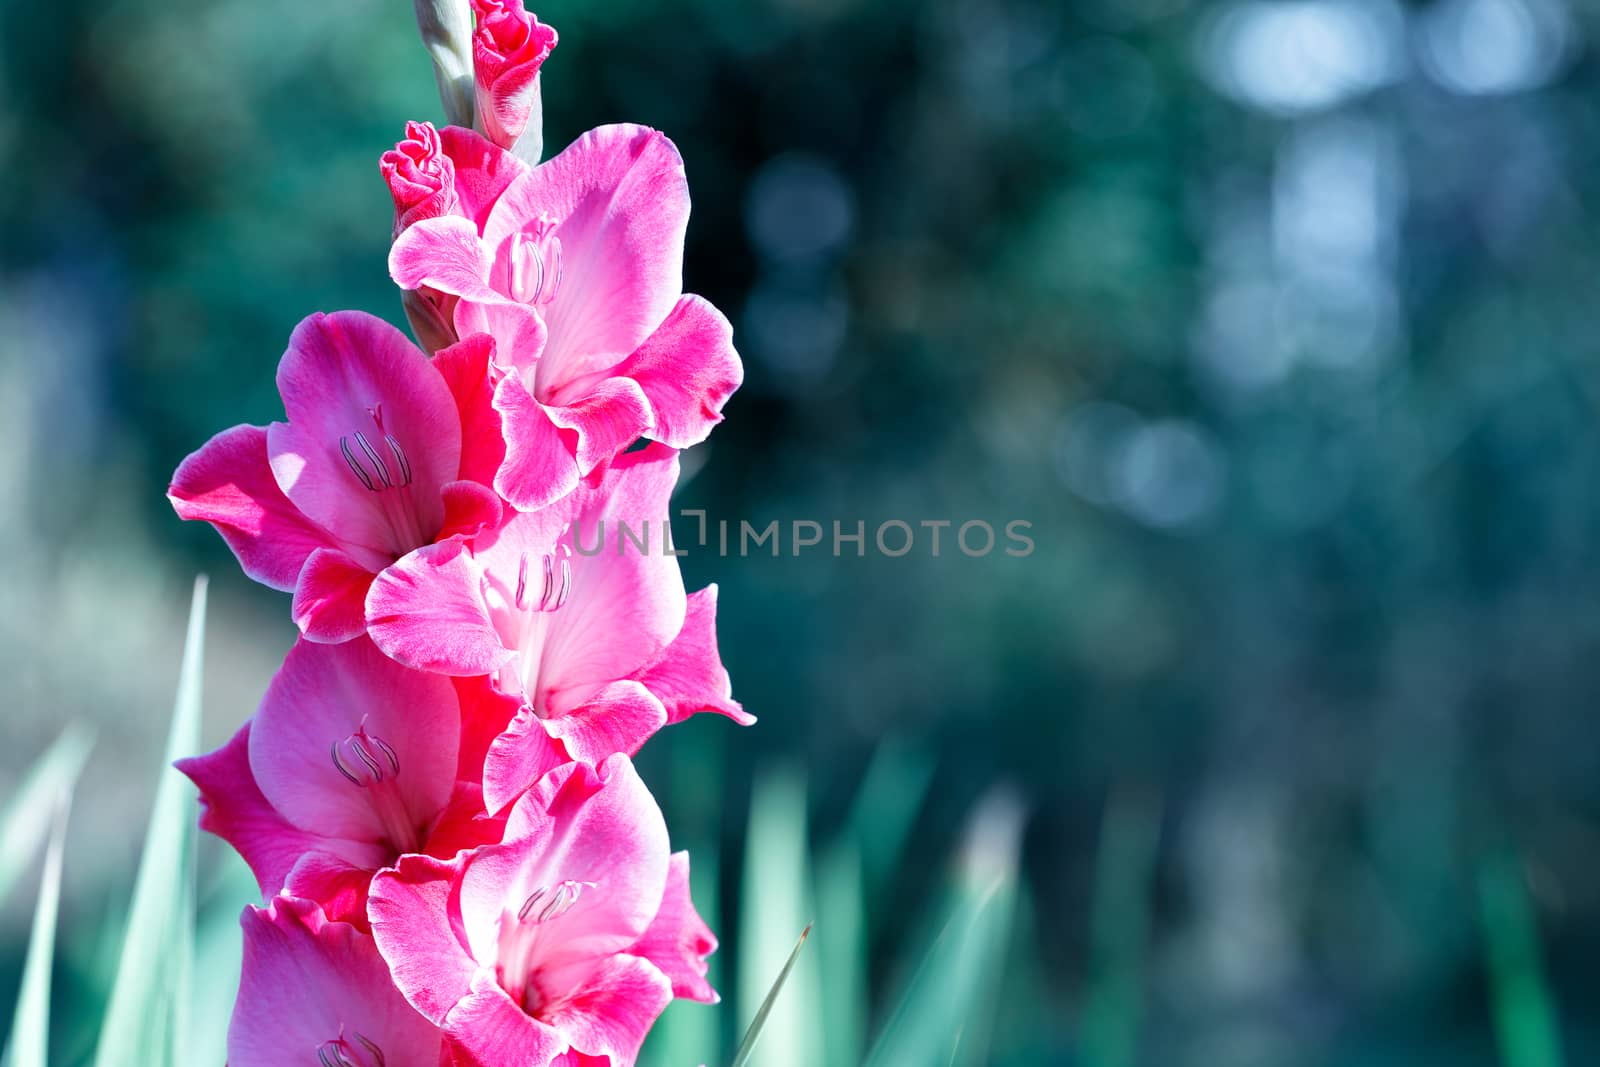 Delicate pink-red gladioli with velvet petals in the rays of soft sunlight bloom in the garden against a background of green leaves, image with copy space.